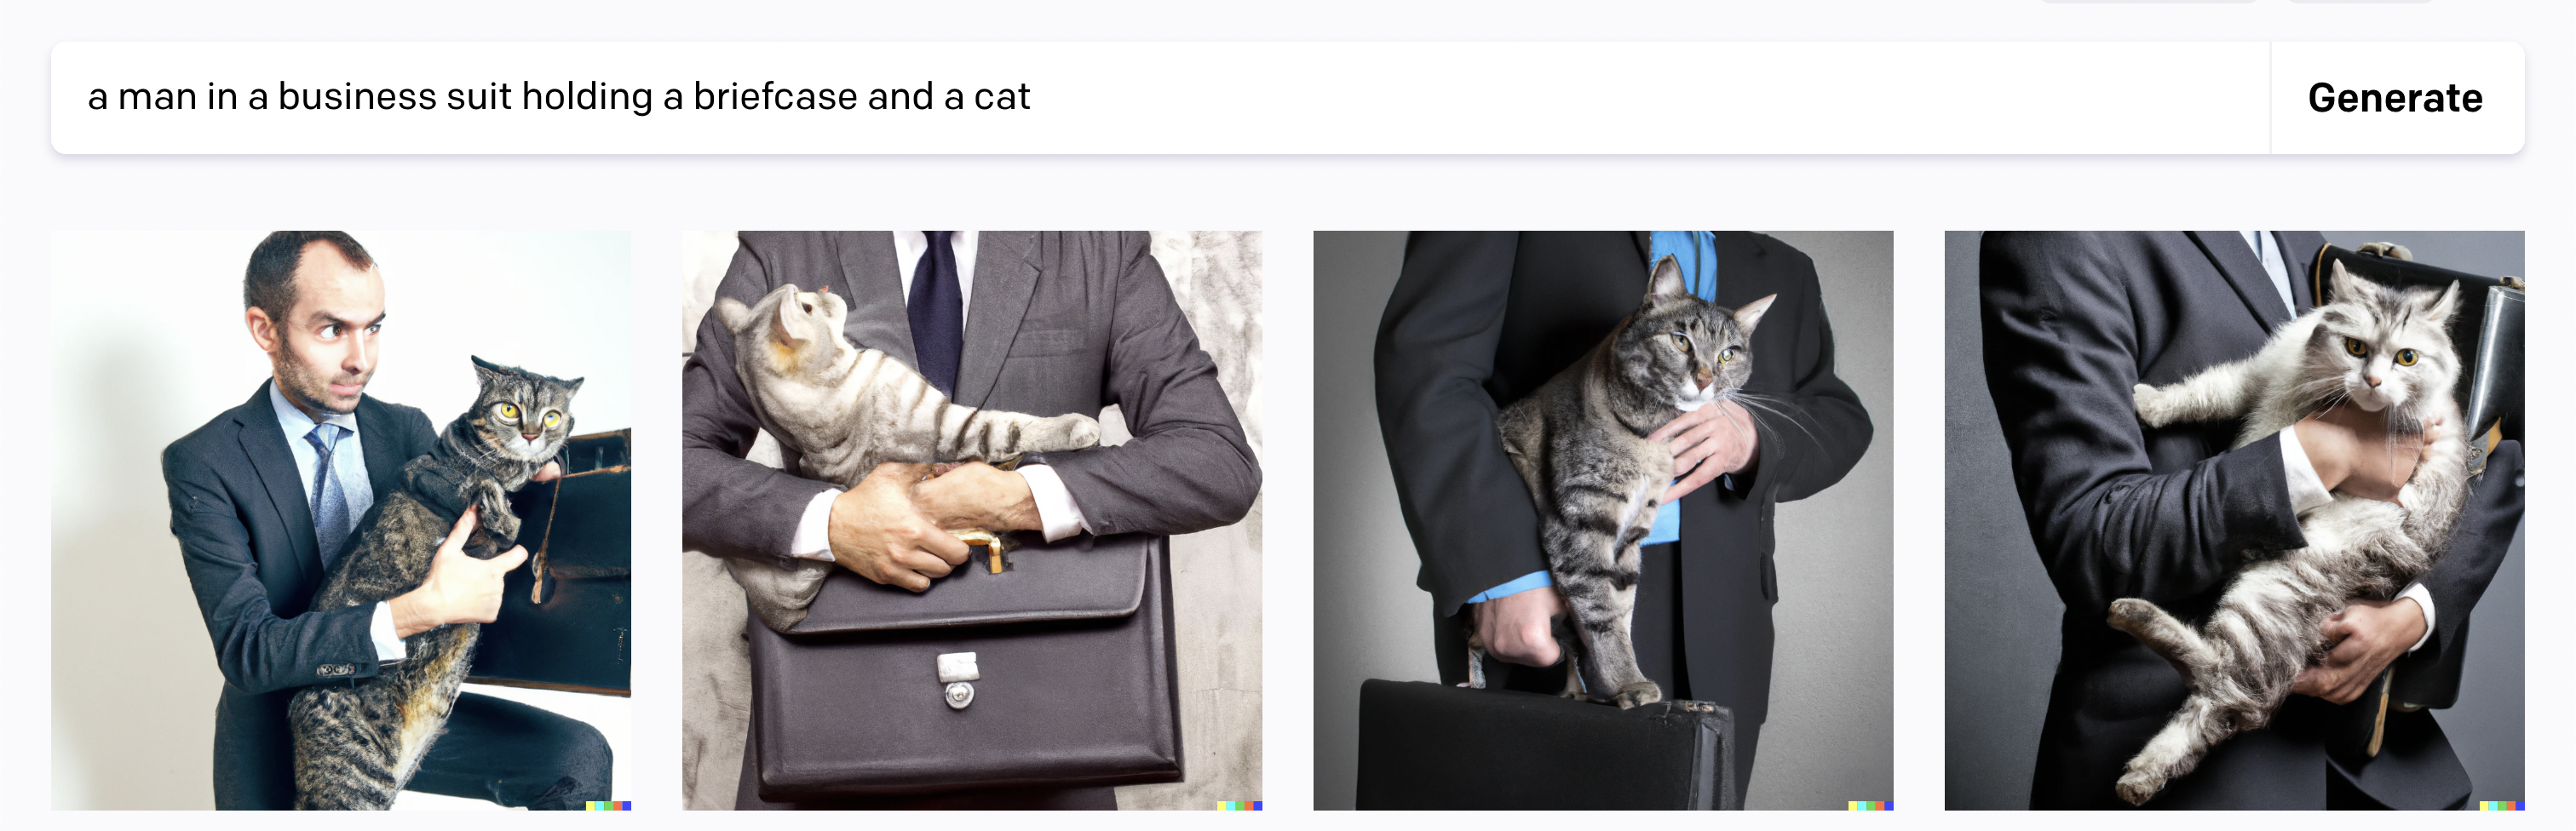 a man in a business suit holding a briefcase and a cat